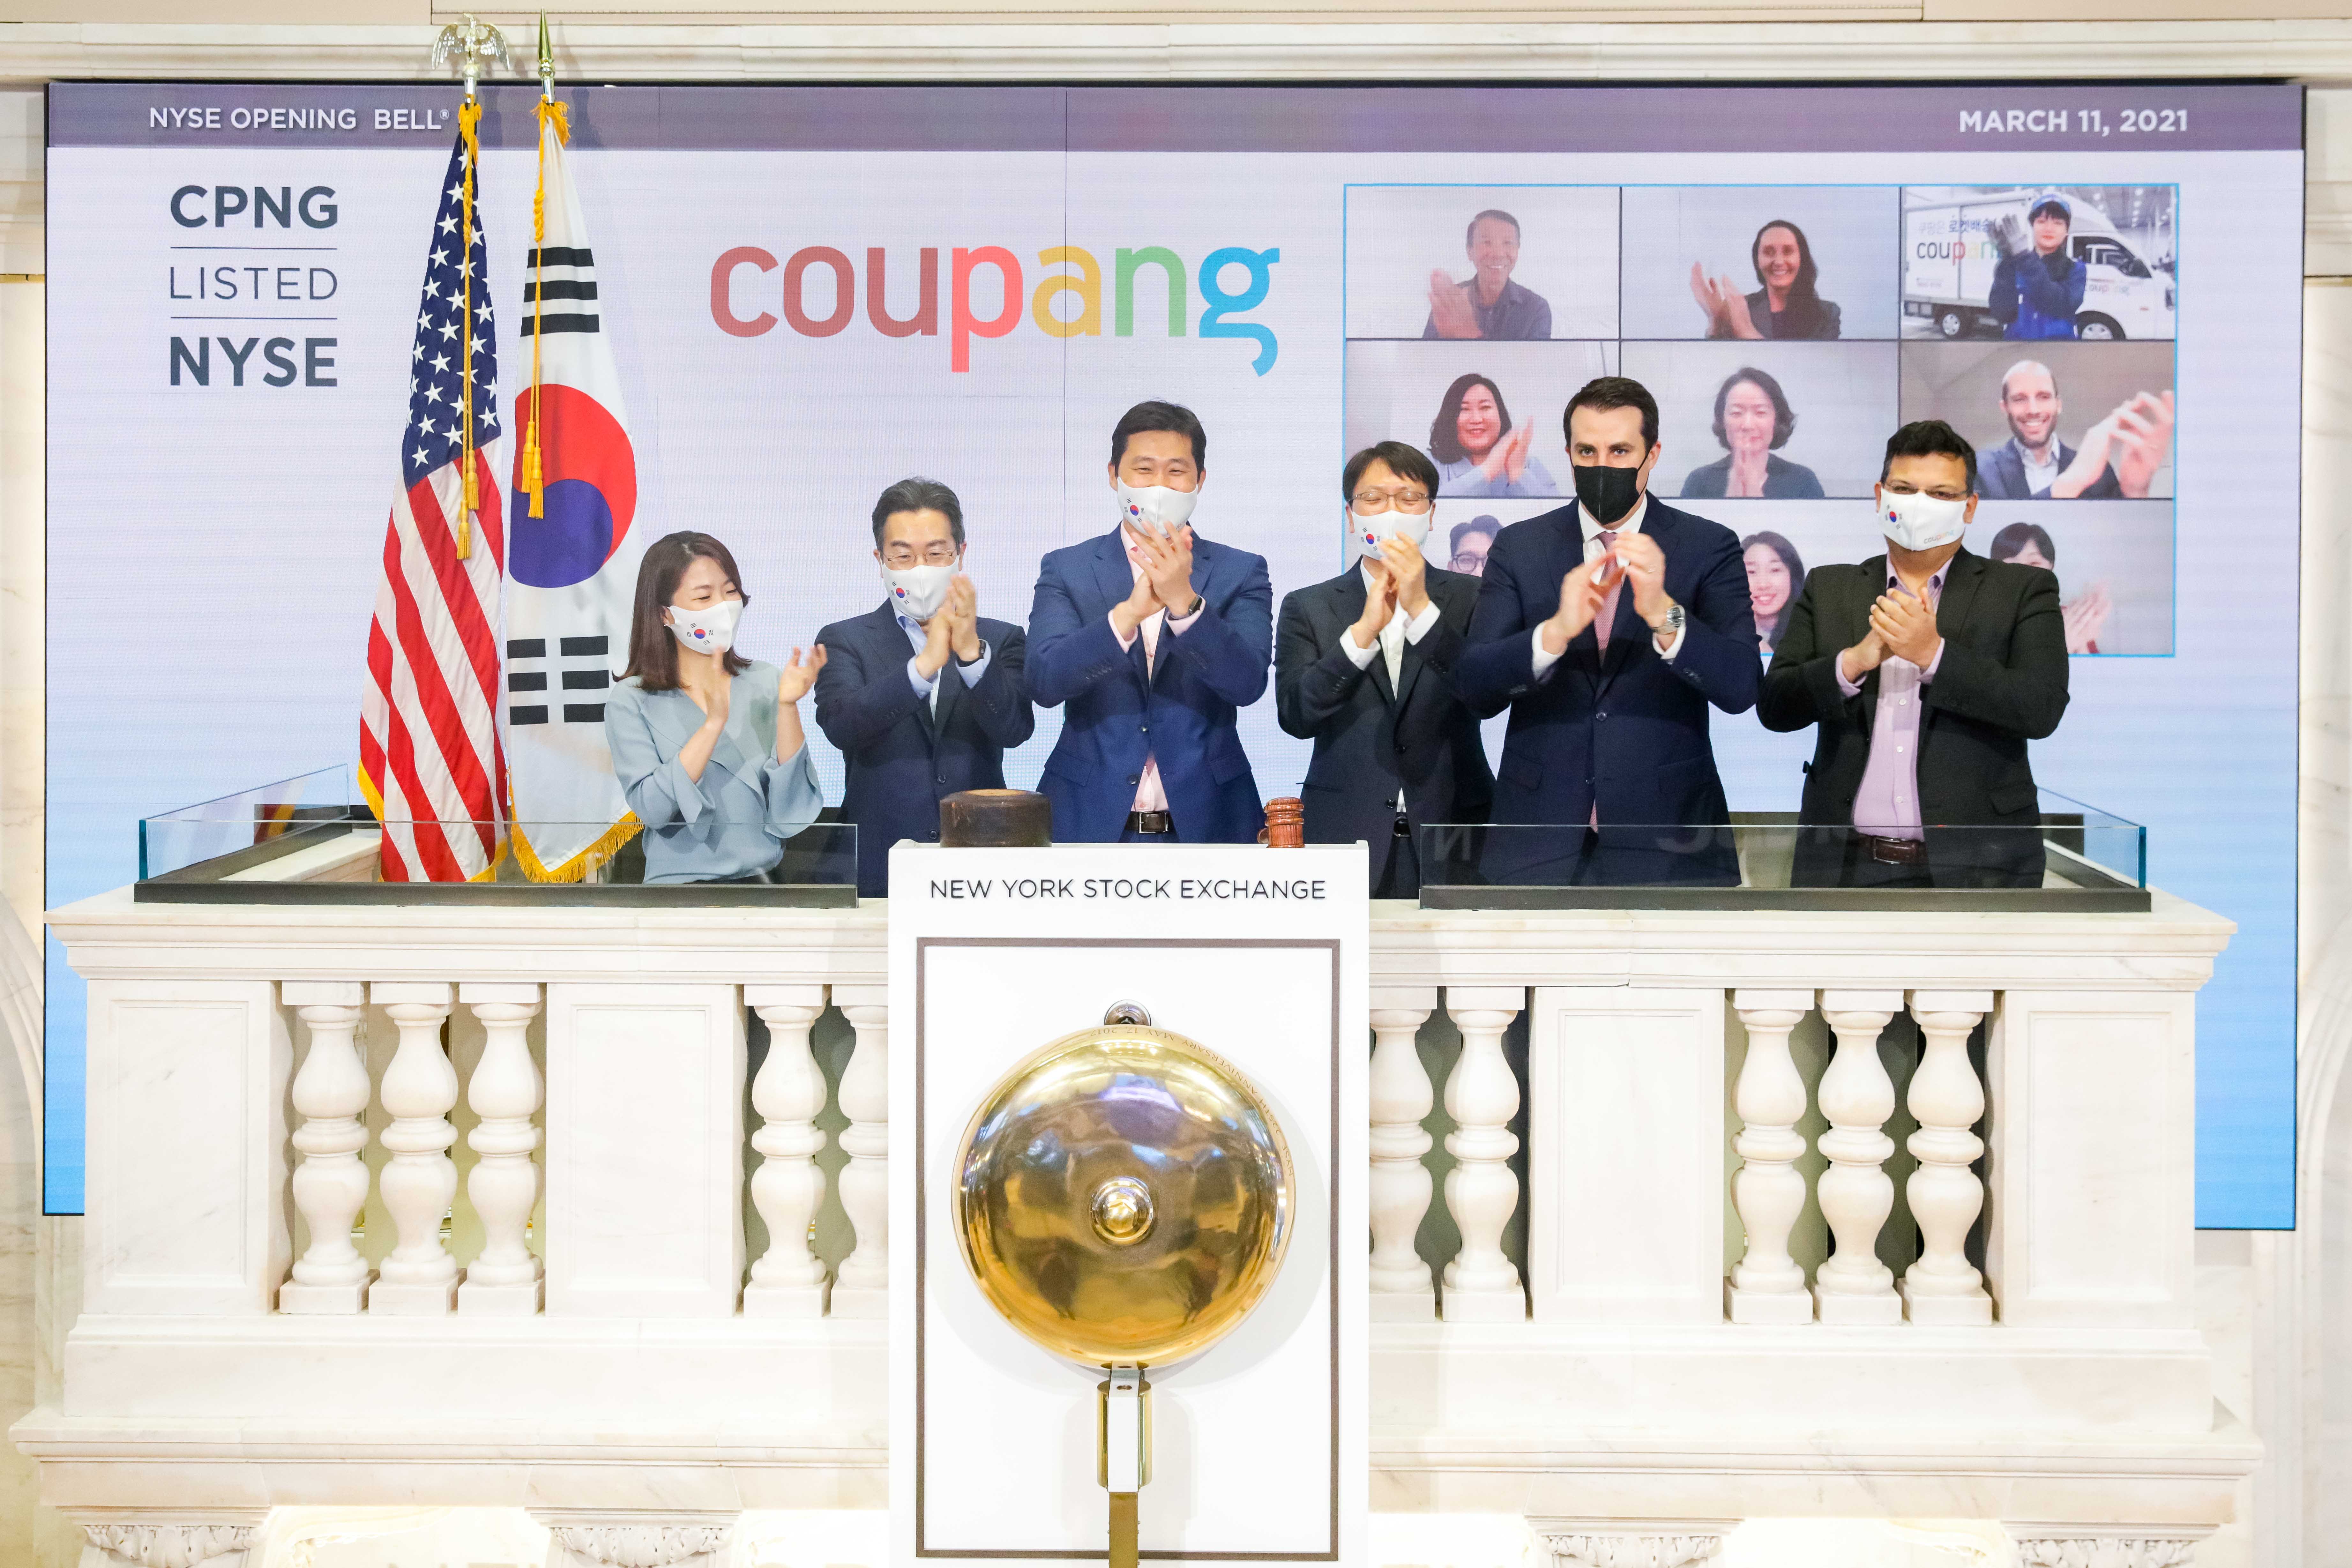 CPNG starts trading on the NYSE